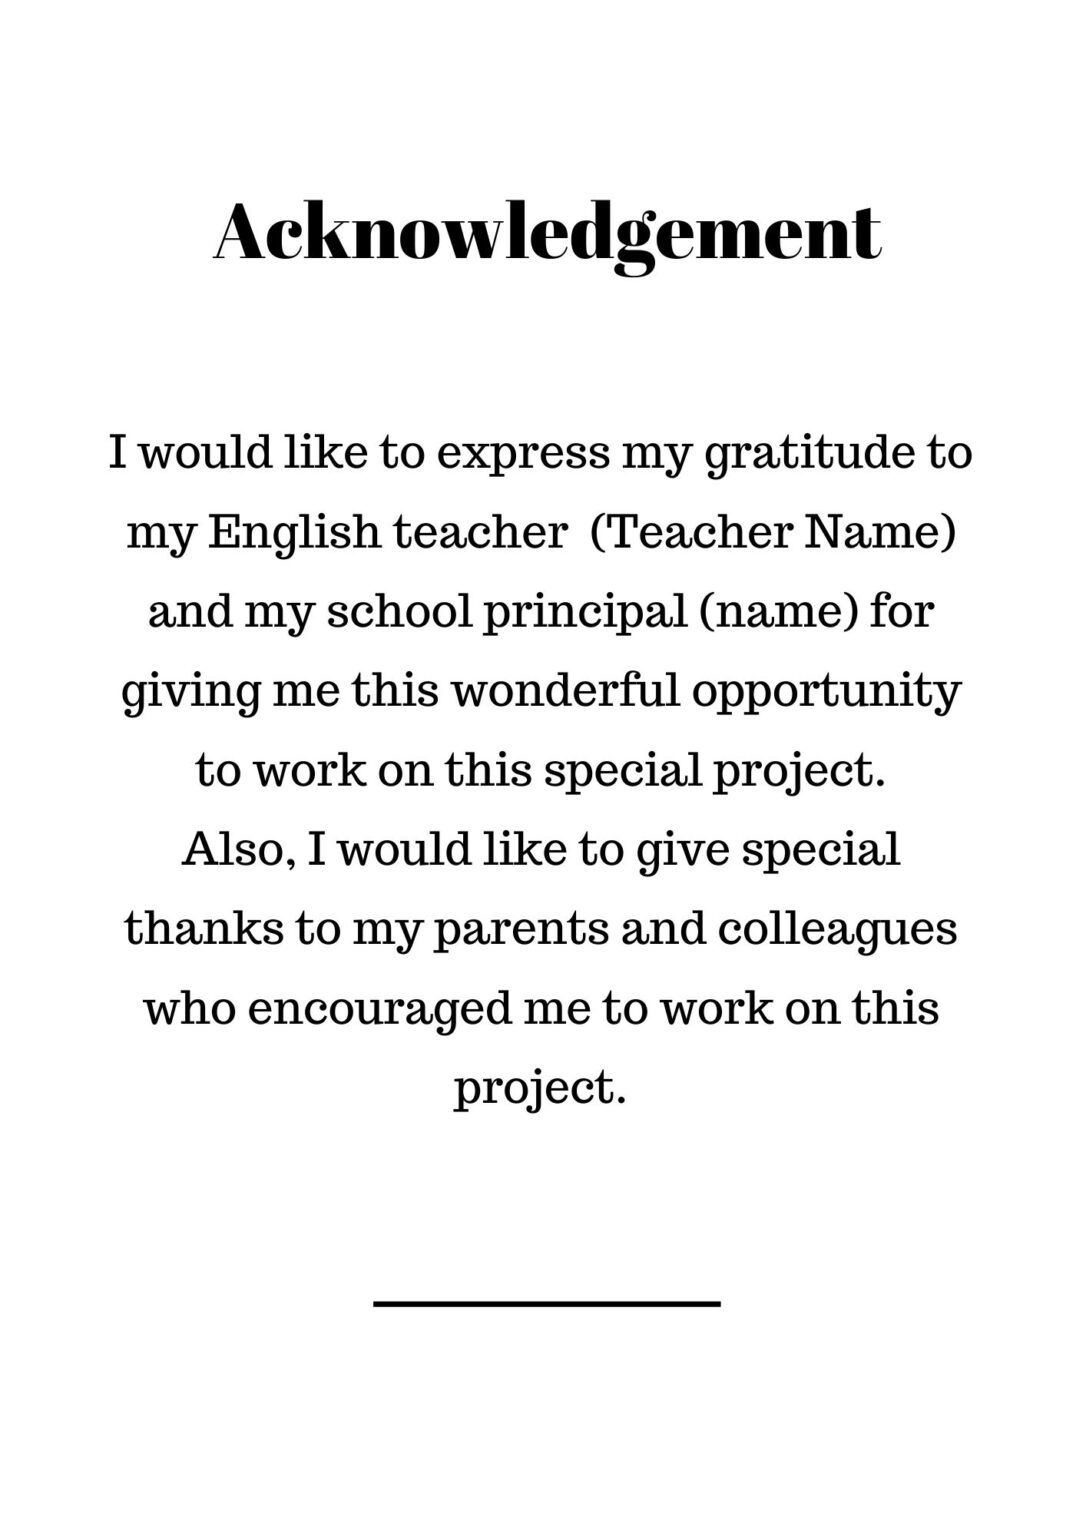 Acknowledgement For English Project Quick Guide With Examples 2145